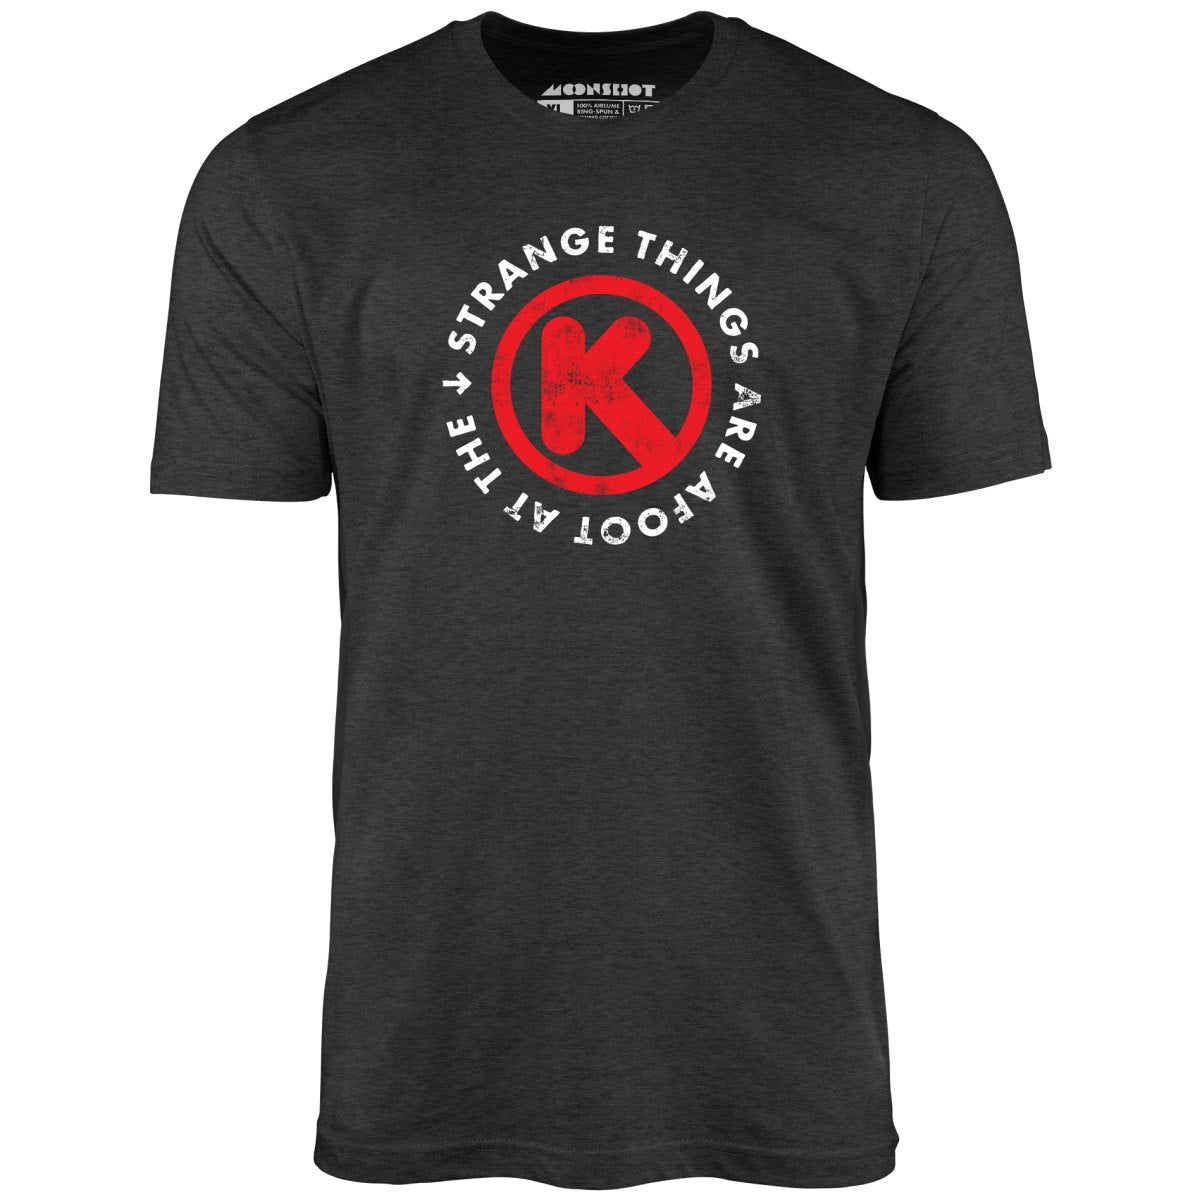 Strange Things are Afoot at the Circle K - Unisex T-Shirt